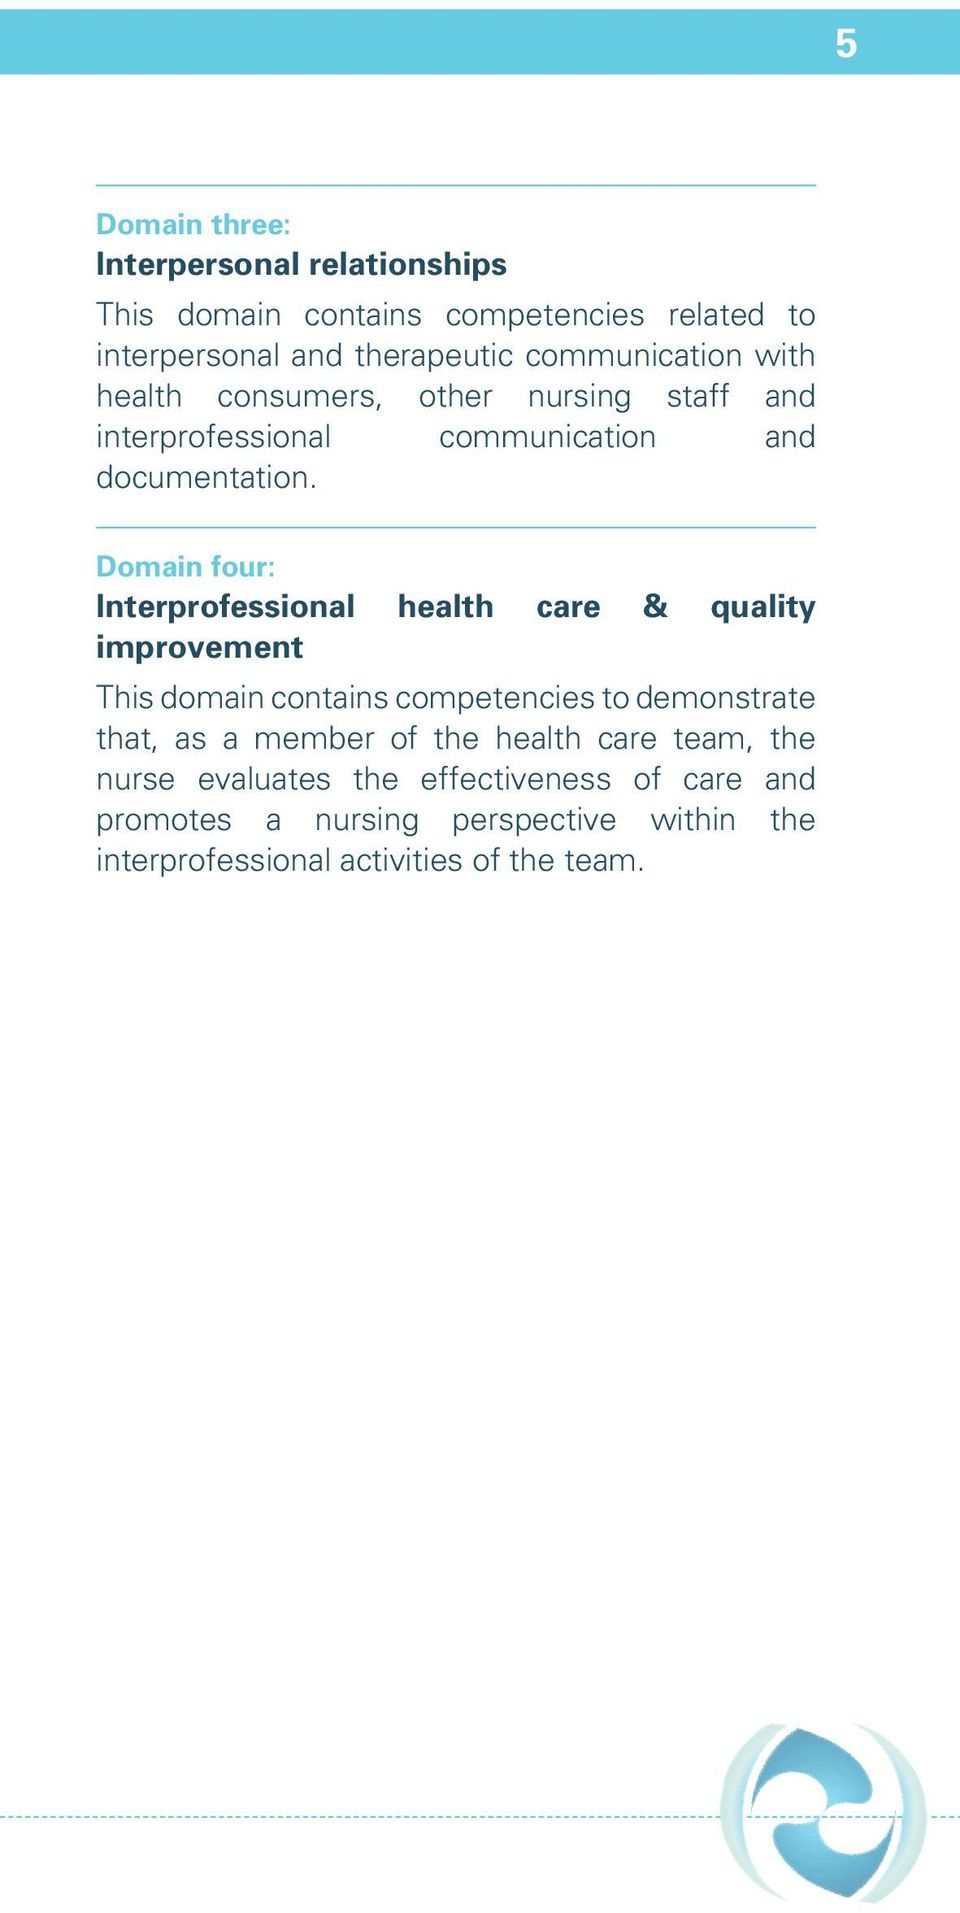 Domain four: Interprofessional health care & quality improvement This domain contains competencies to demonstrate that, as a